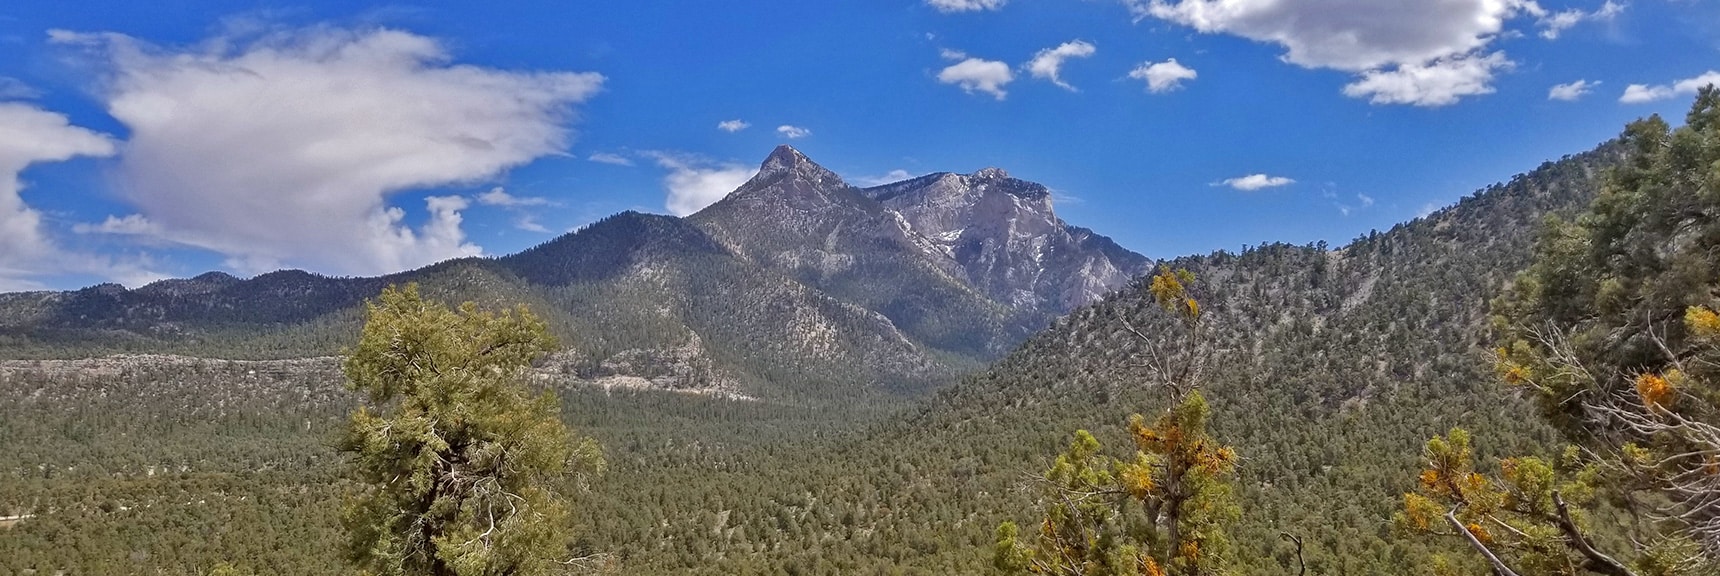 Mummy Mountain's Head Viewed from an Initial Rise on the Mud Springs Loop Trail | Sawmill Trail to McFarland Peak | Spring Mountains, Nevada